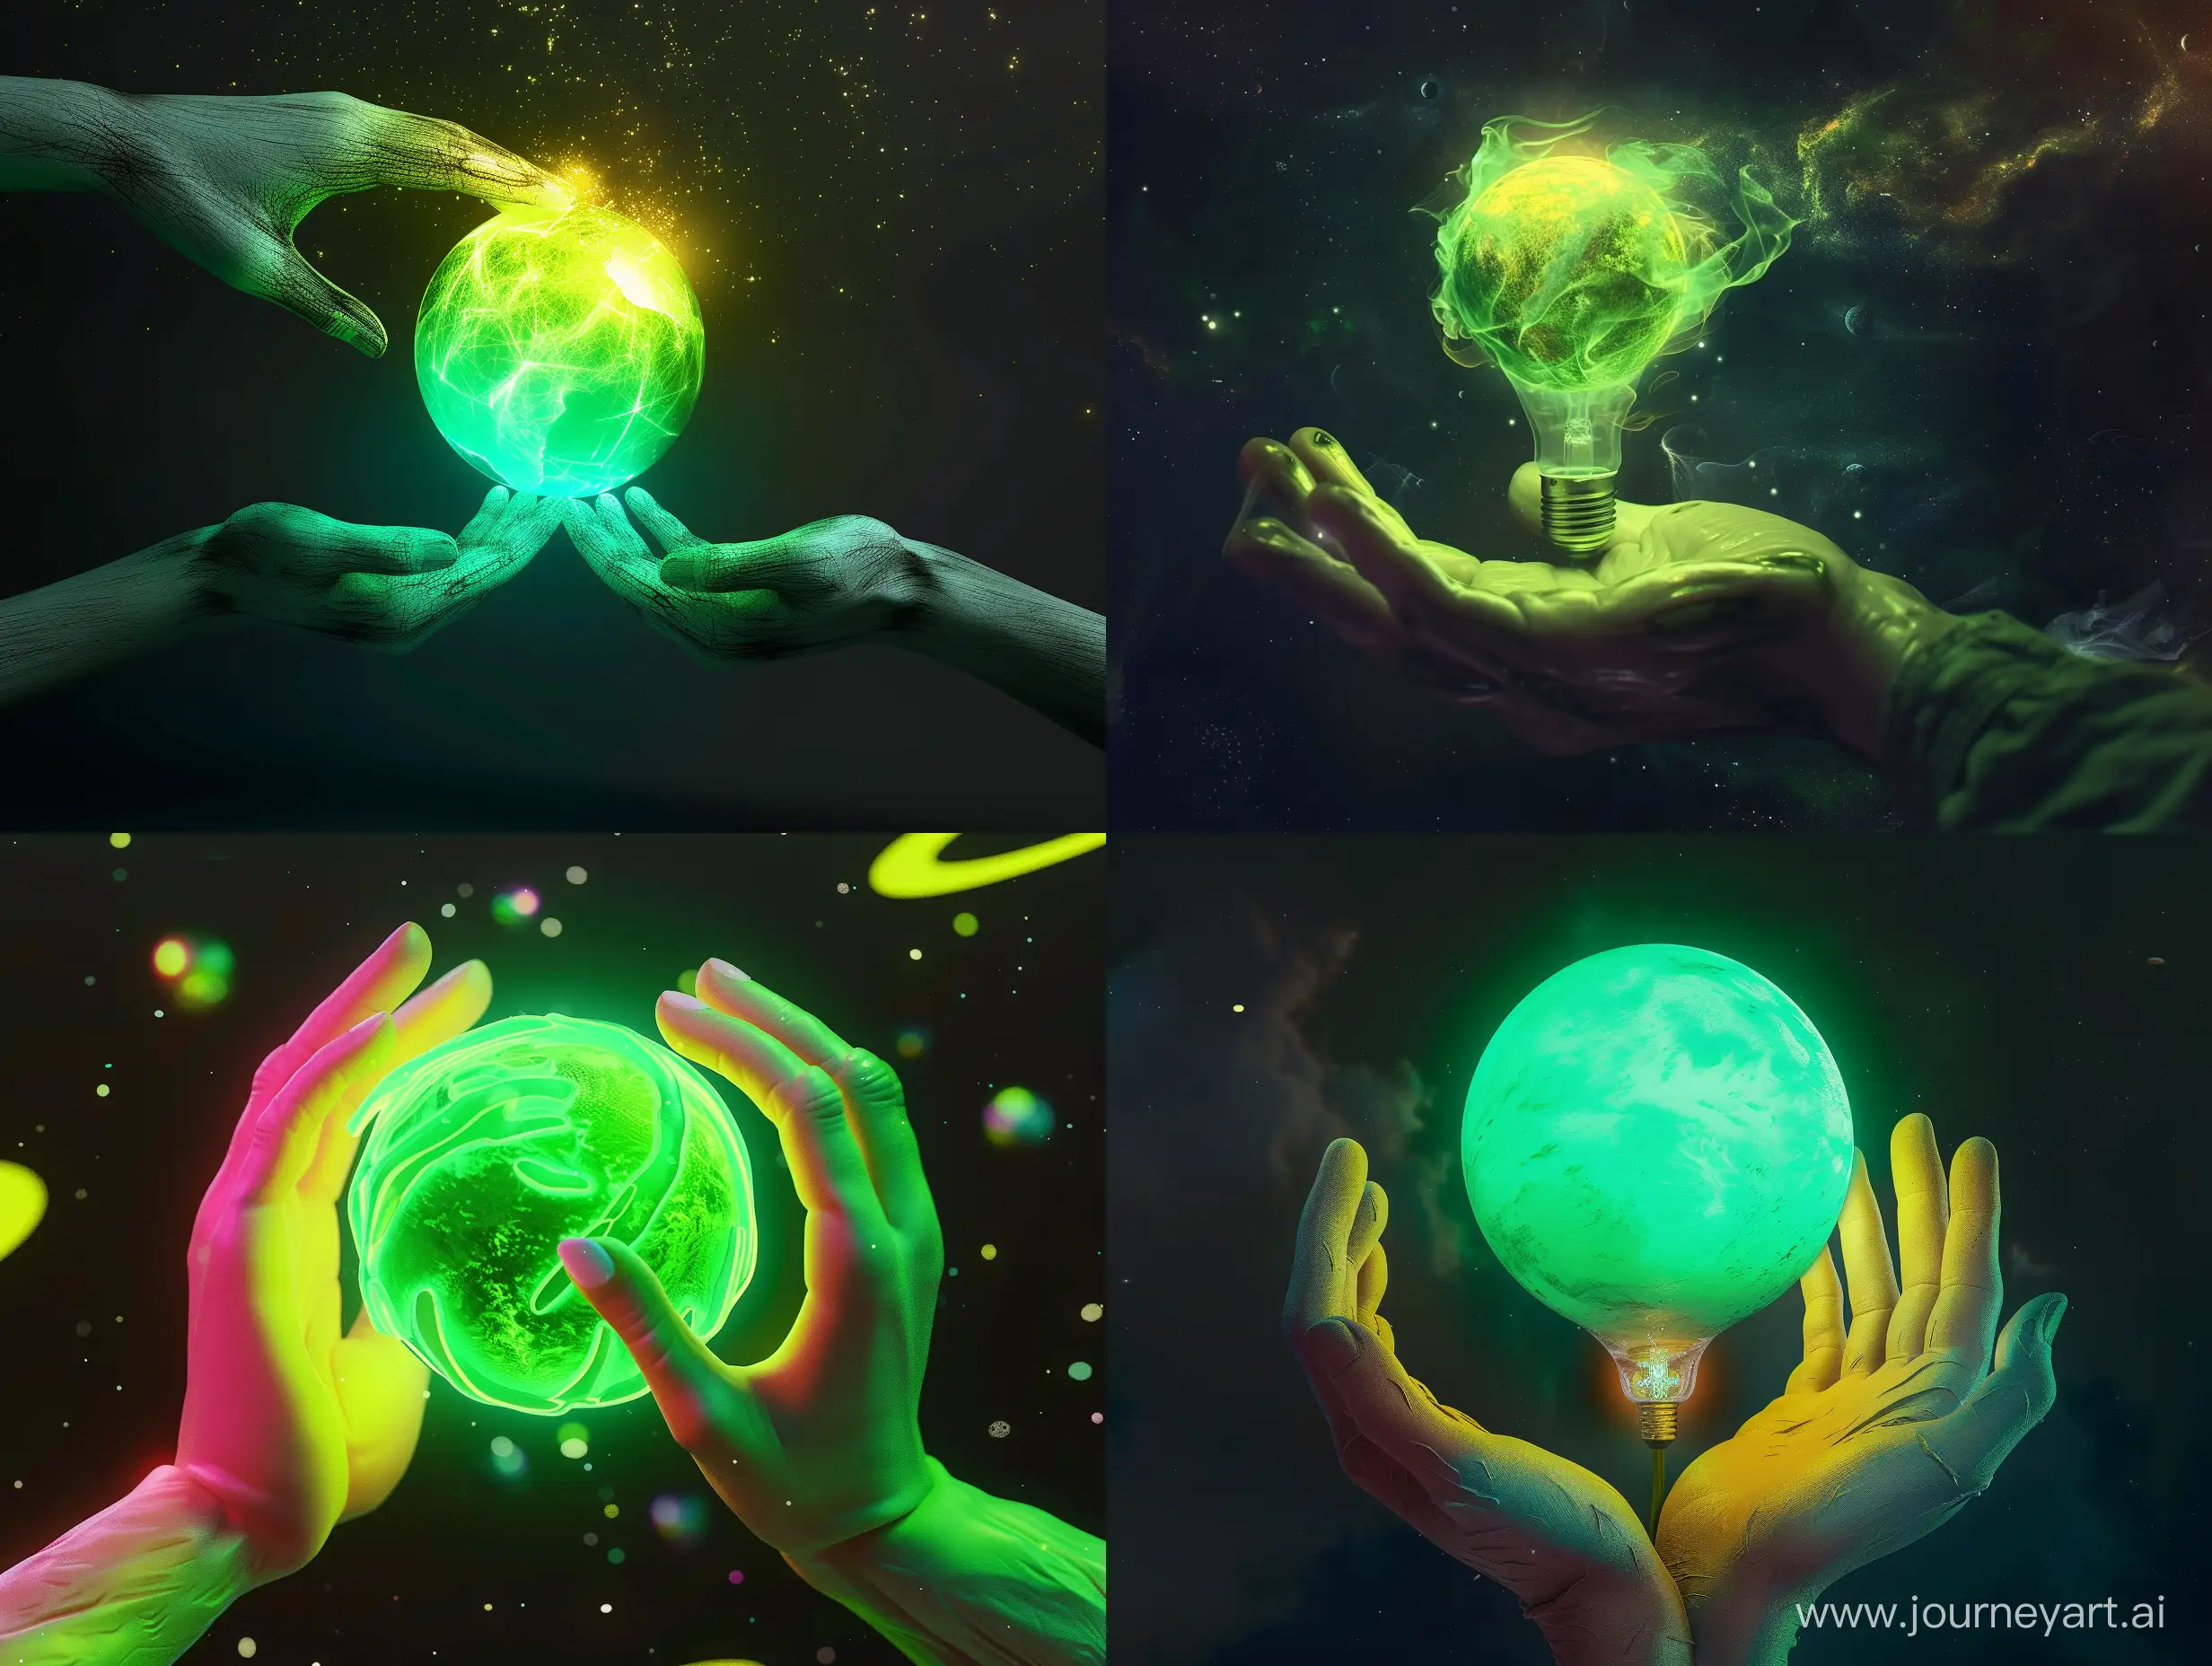 Magical-Beauty-Hands-Orbiting-Phosphor-Green-Planet-Advertising-Image